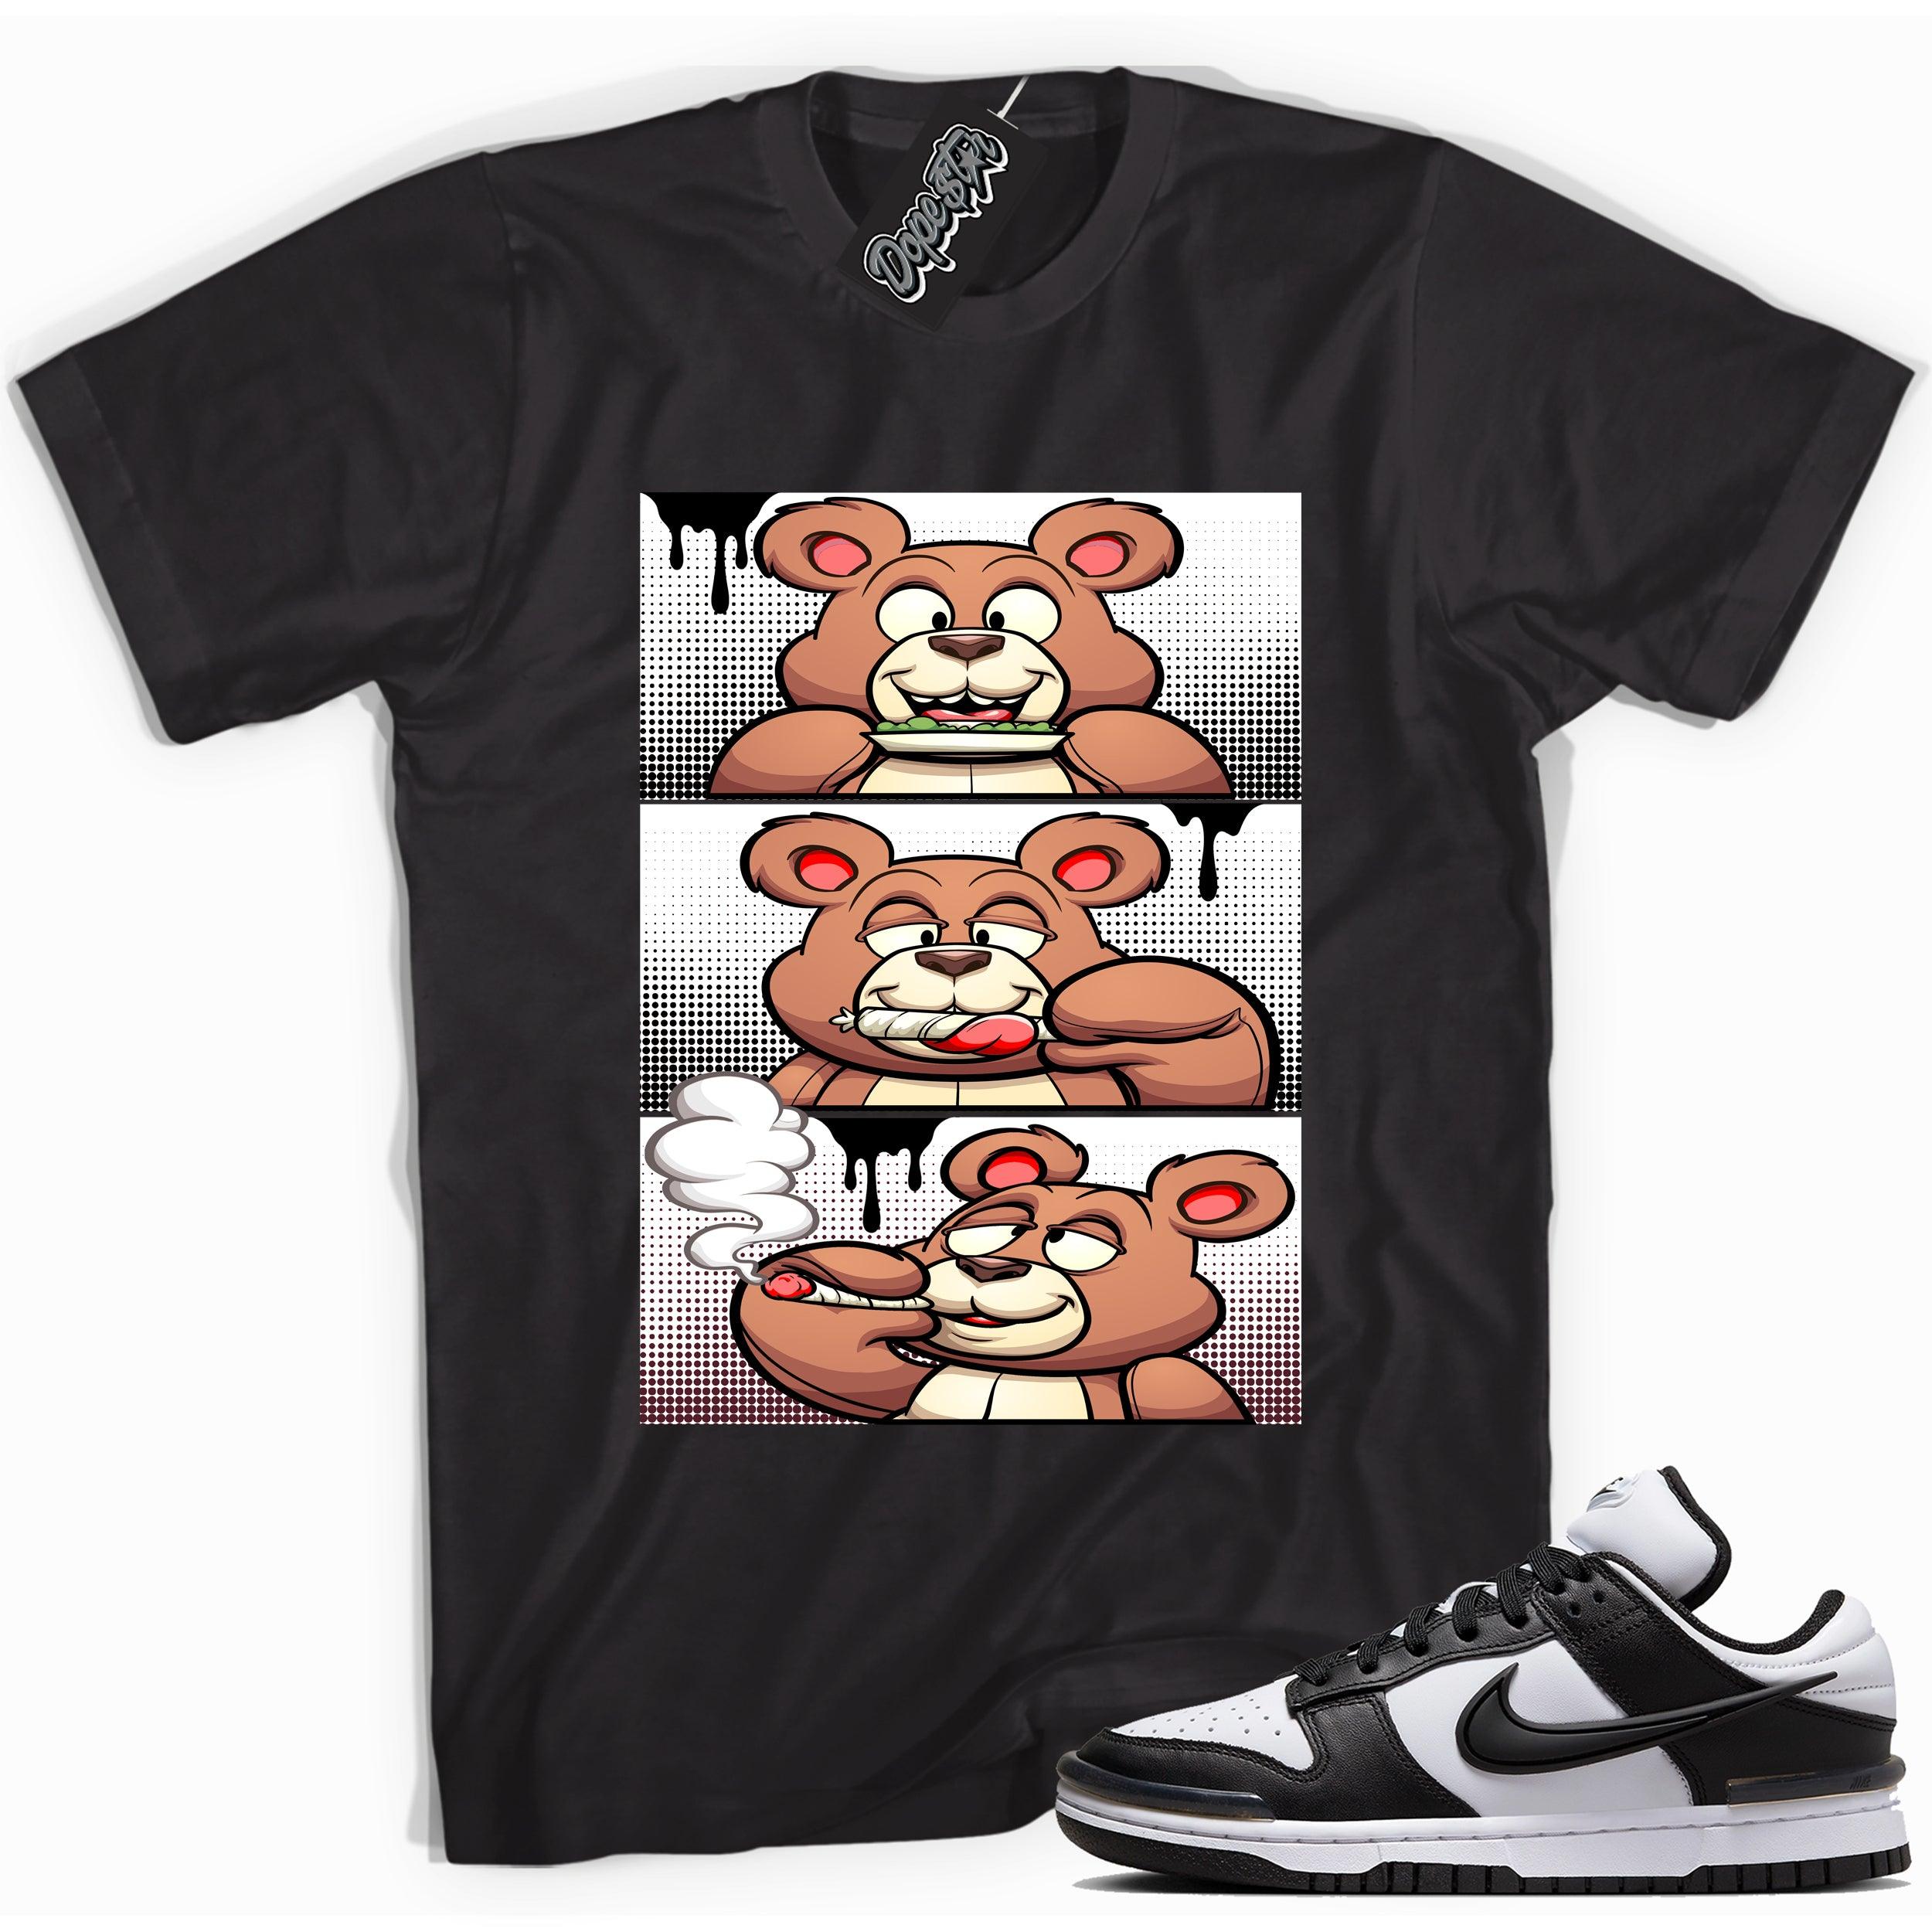 Cool black graphic tee with 'roll it lick it smoke it' print, that perfectly matches Nike Dunk Low Twist Panda sneakers.